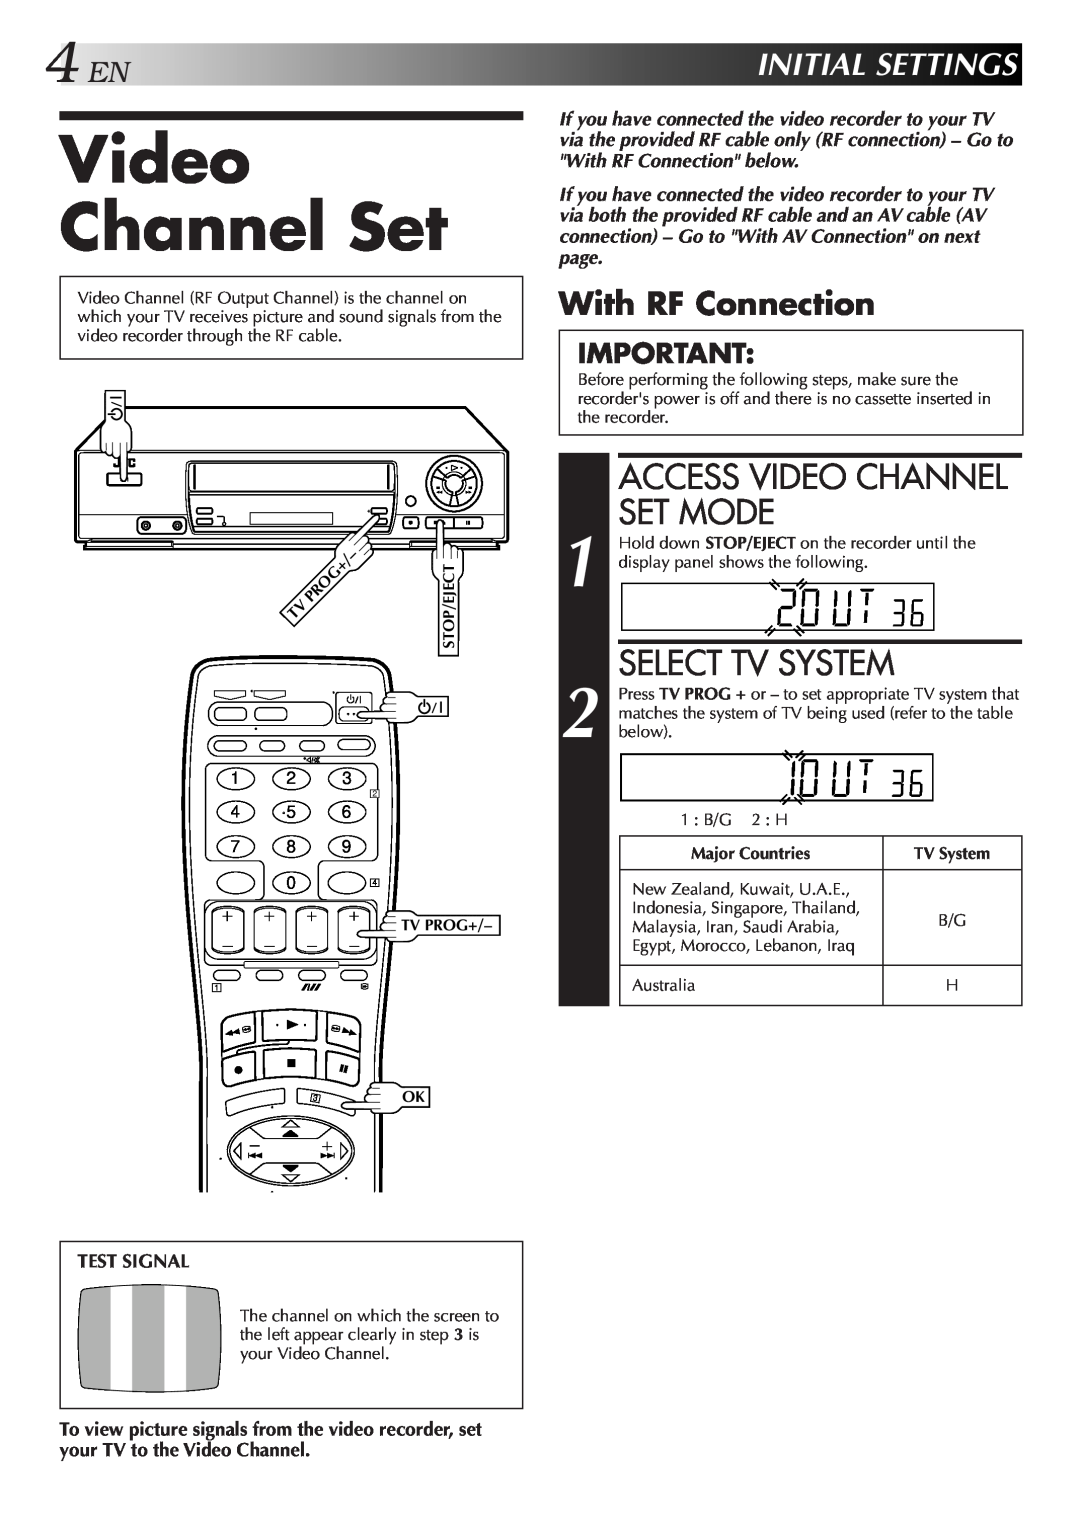 JVC HR-J455EA specifications Access Video Channel Set Mode, Select Tv System, 4ENINITIALSETTINGS, With RF Connection 